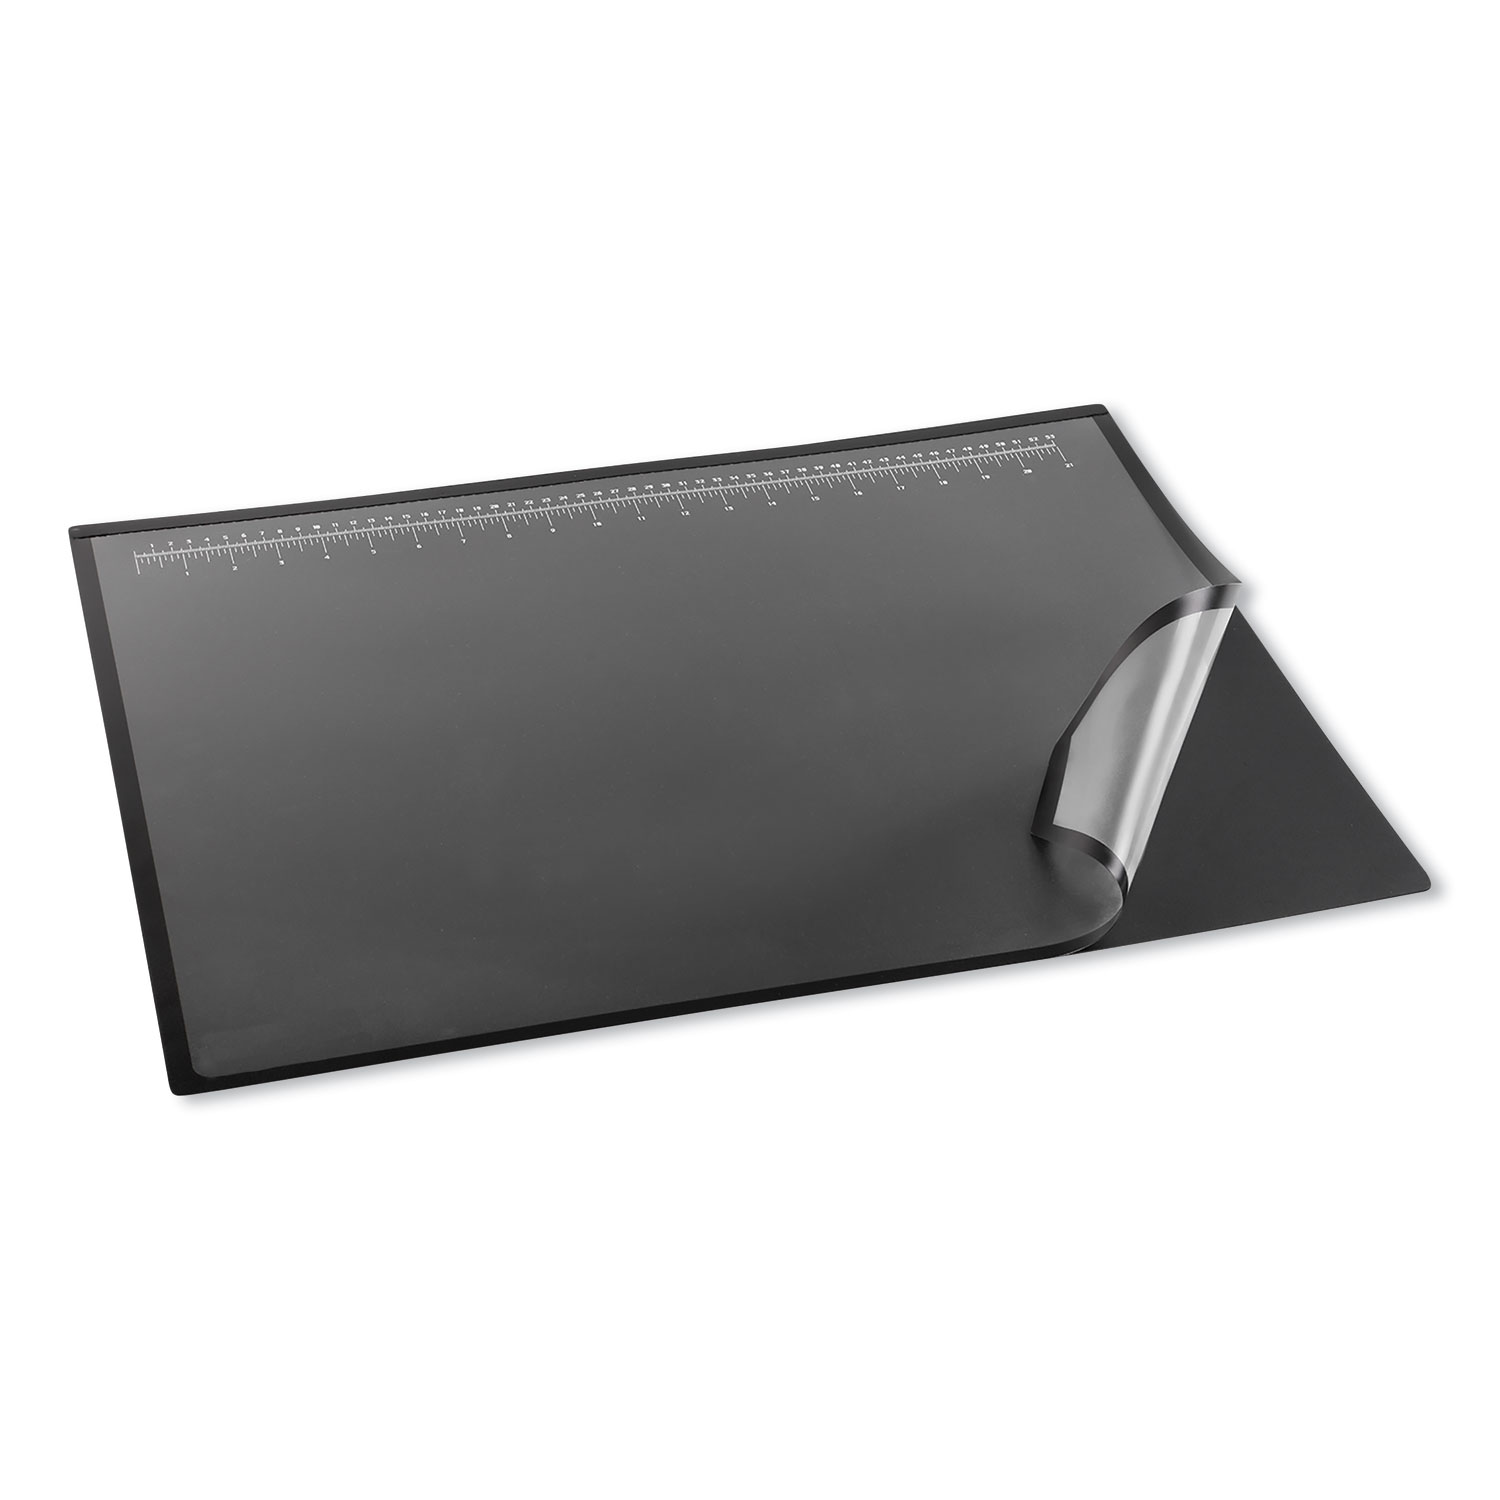 Desk Pad with Transparent Lift-Top Overlay and Antimicrobial Protection,  24 x 19, Black Pad, Transparent Frost Overlay